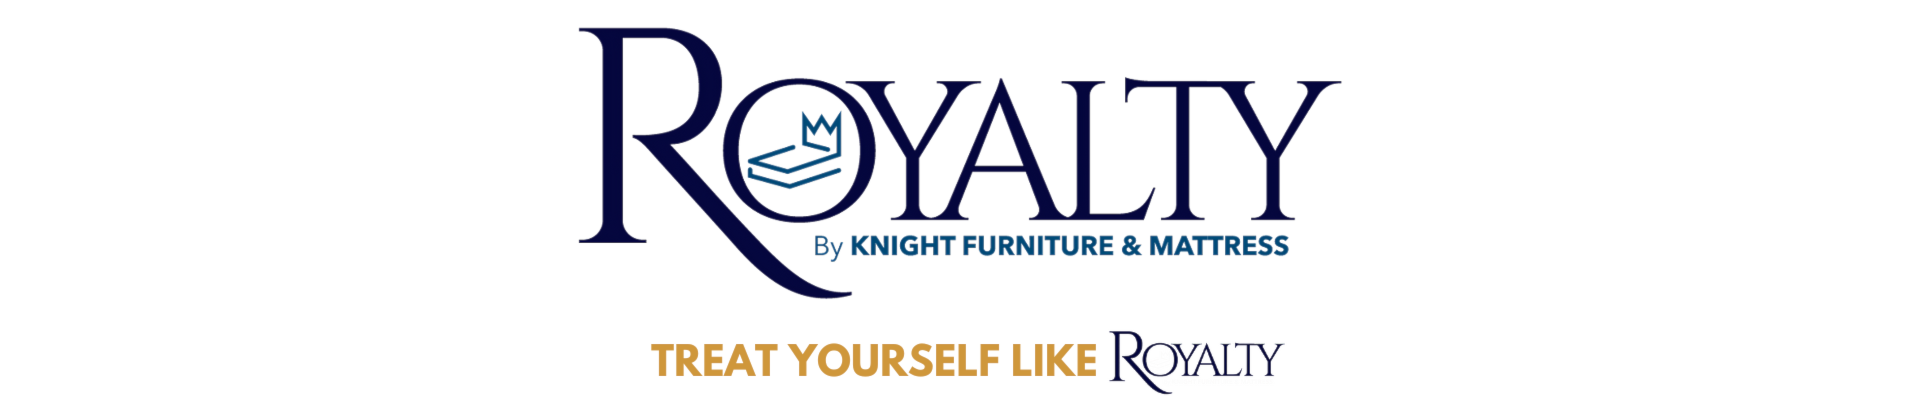 Royalty by Knight Furniture & Mattress